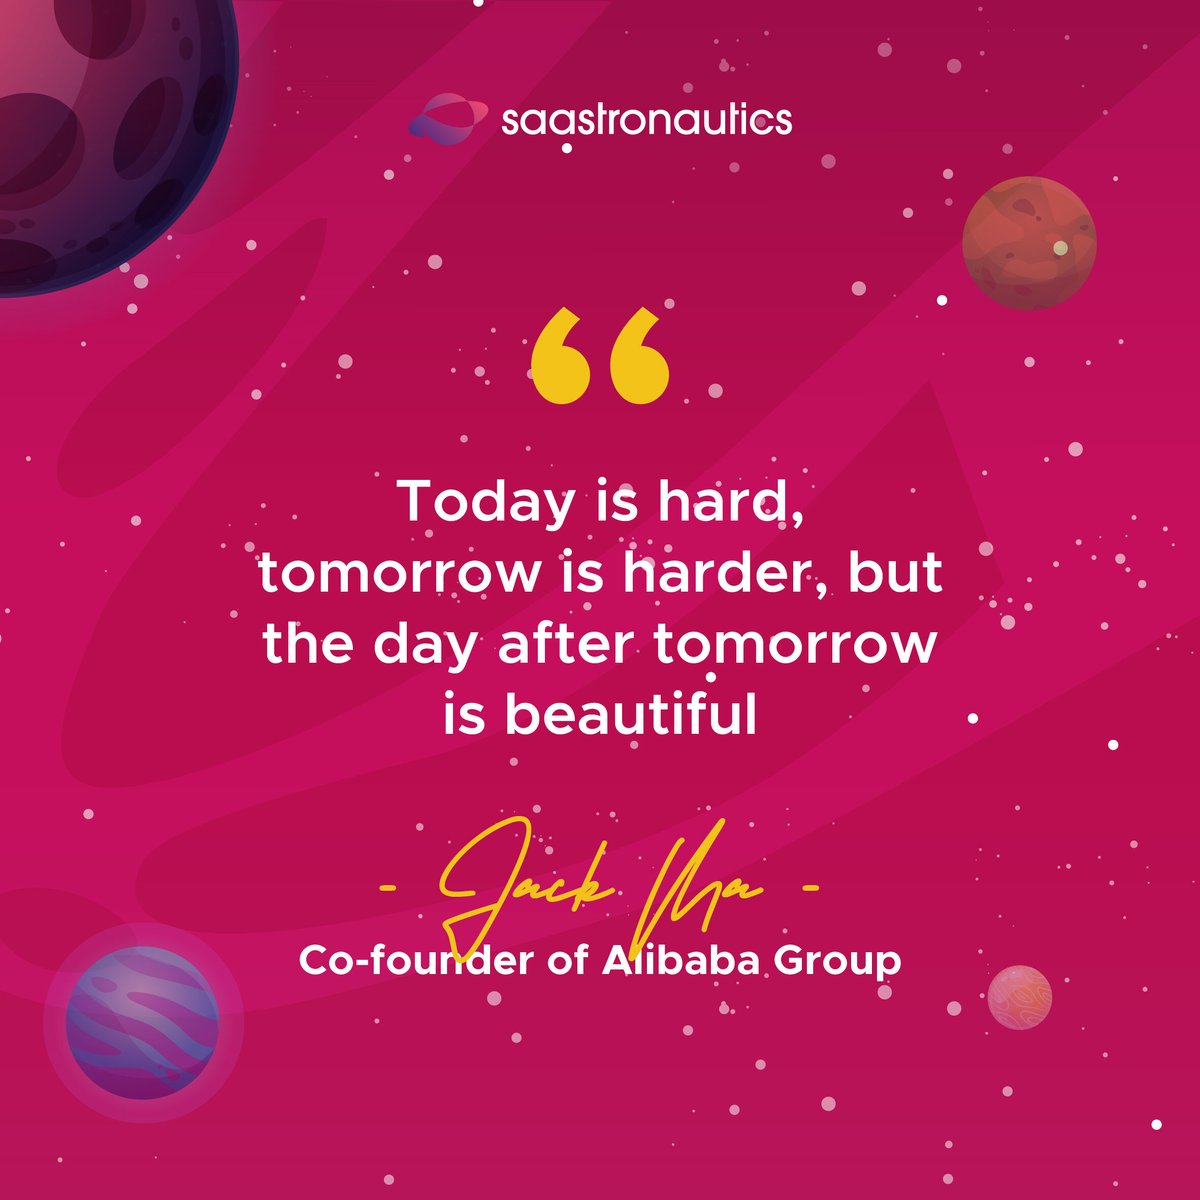 Glory days are coming soon.
Keep moving forward Saastronauts!

#quotes #successwithus #saasfounder #startupcompanys #startuptipsandtricks #expertmarketing #onlinebusinessstrategy #getmoresales #grownow #digitalmarketingnews #onlinesolutions #startupfounders